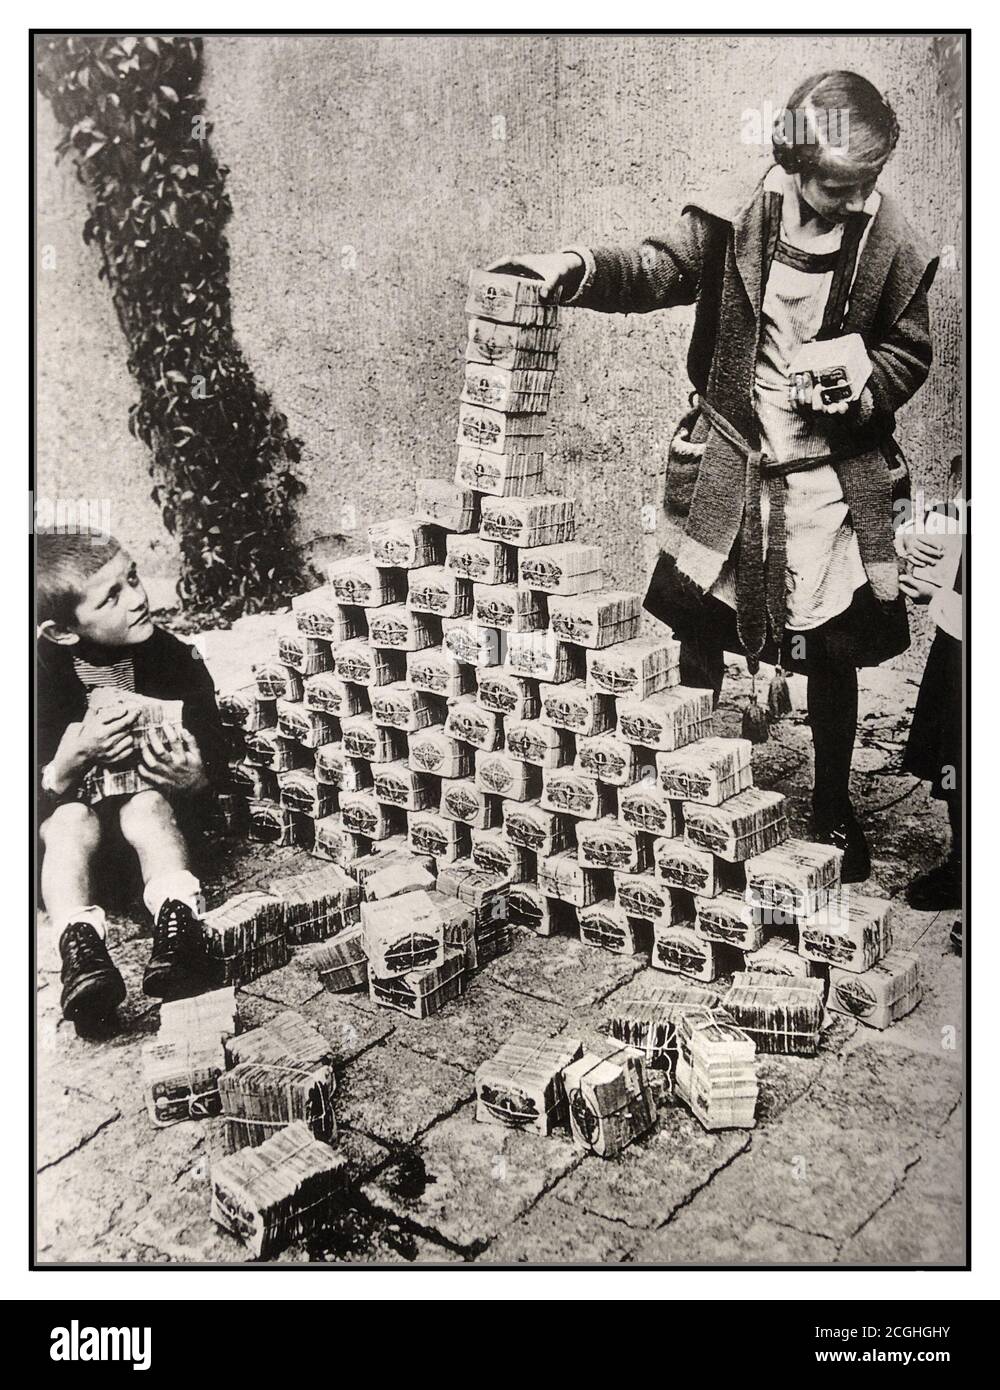 1920’s Archive Hyperinflation Germany, children using banknotes as toys, Germany, 1920’s. Hyperinflation affected the German Papiermark, the currency of the Weimar Republic, between 1921 and 1923, primarily in 1923. It caused considerable internal political instability in the country, the occupation of the Ruhr by France and Belgium as well as misery for the general populace. Printing more money is exactly what Weimar Germany did in 1922. To meet Allied reparations, they printed more money; this caused the hyperinflation of the 1920s. The hyperinflation led to the collapse of the economy. Stock Photo